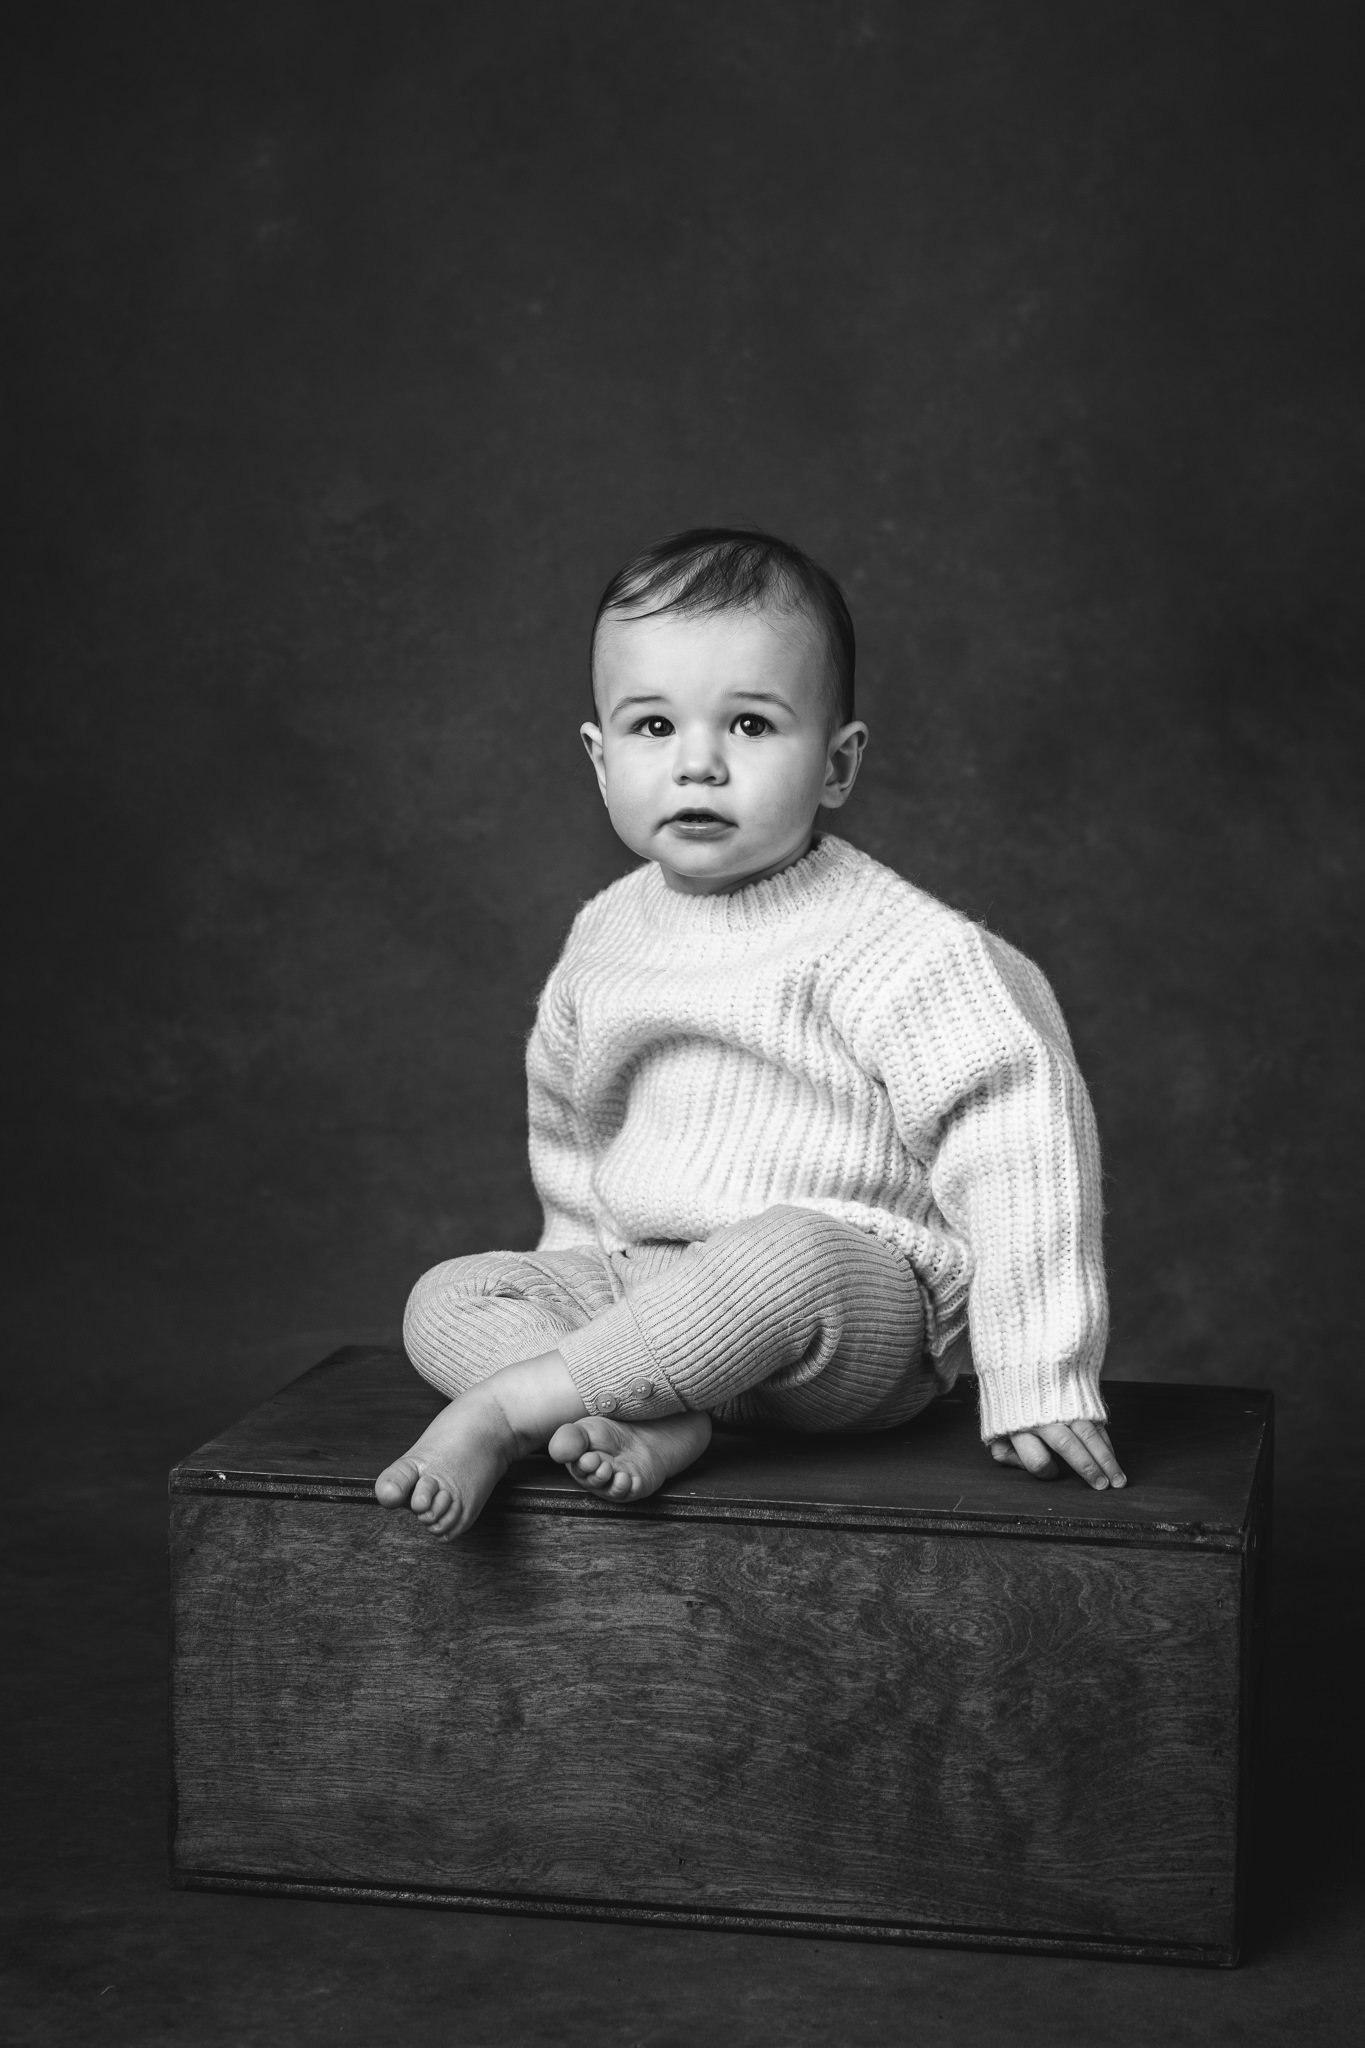  A timeless portrait of a birthday boy on his first birthday by Nicole Hawkins Photography. first birthday studio portrait in New Jersey New York #NicoleHawkinsPhotography #NicoleHawkinsBabies #FirstBirthdayPhotography #StudioFamilyPortraits #NJBabie